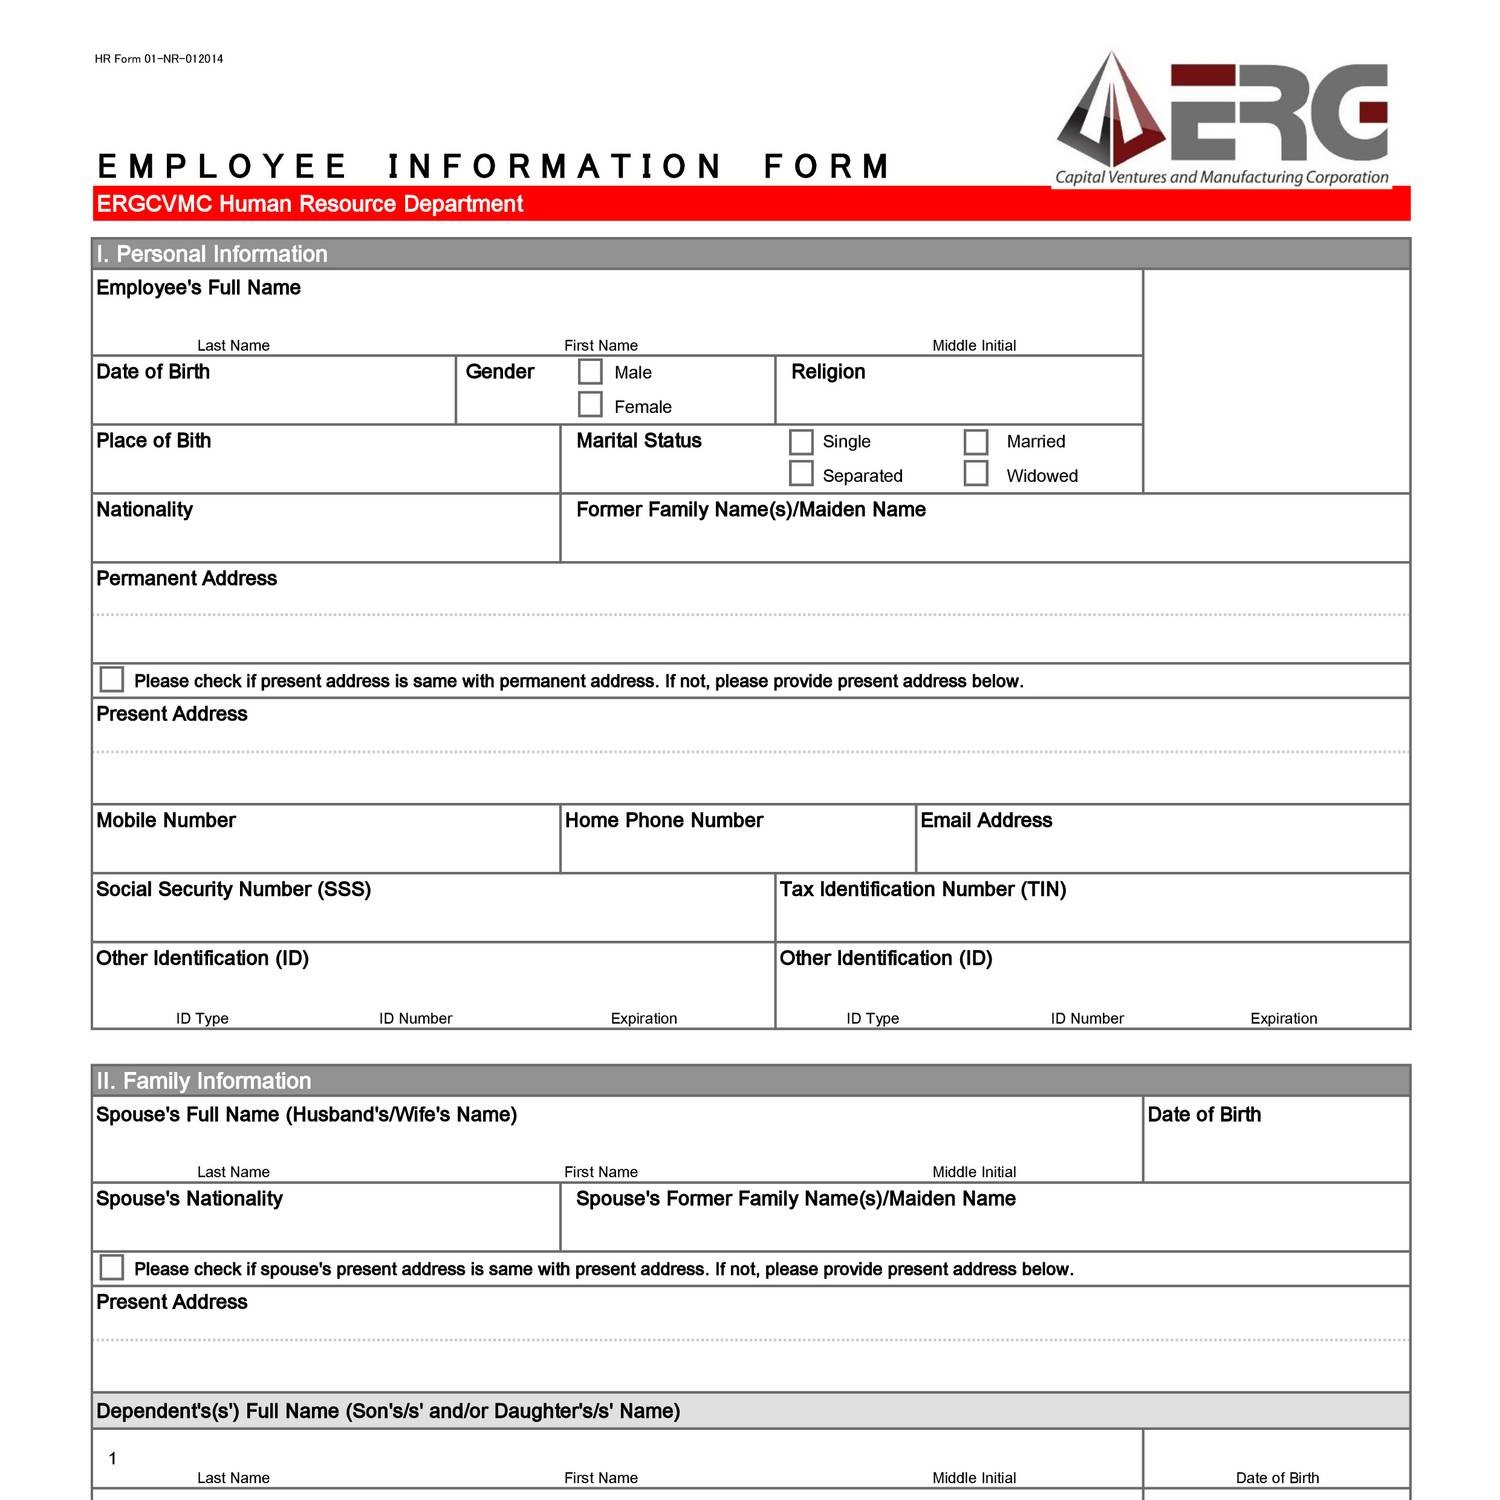 Employee Information Form.pdf | DocDroid